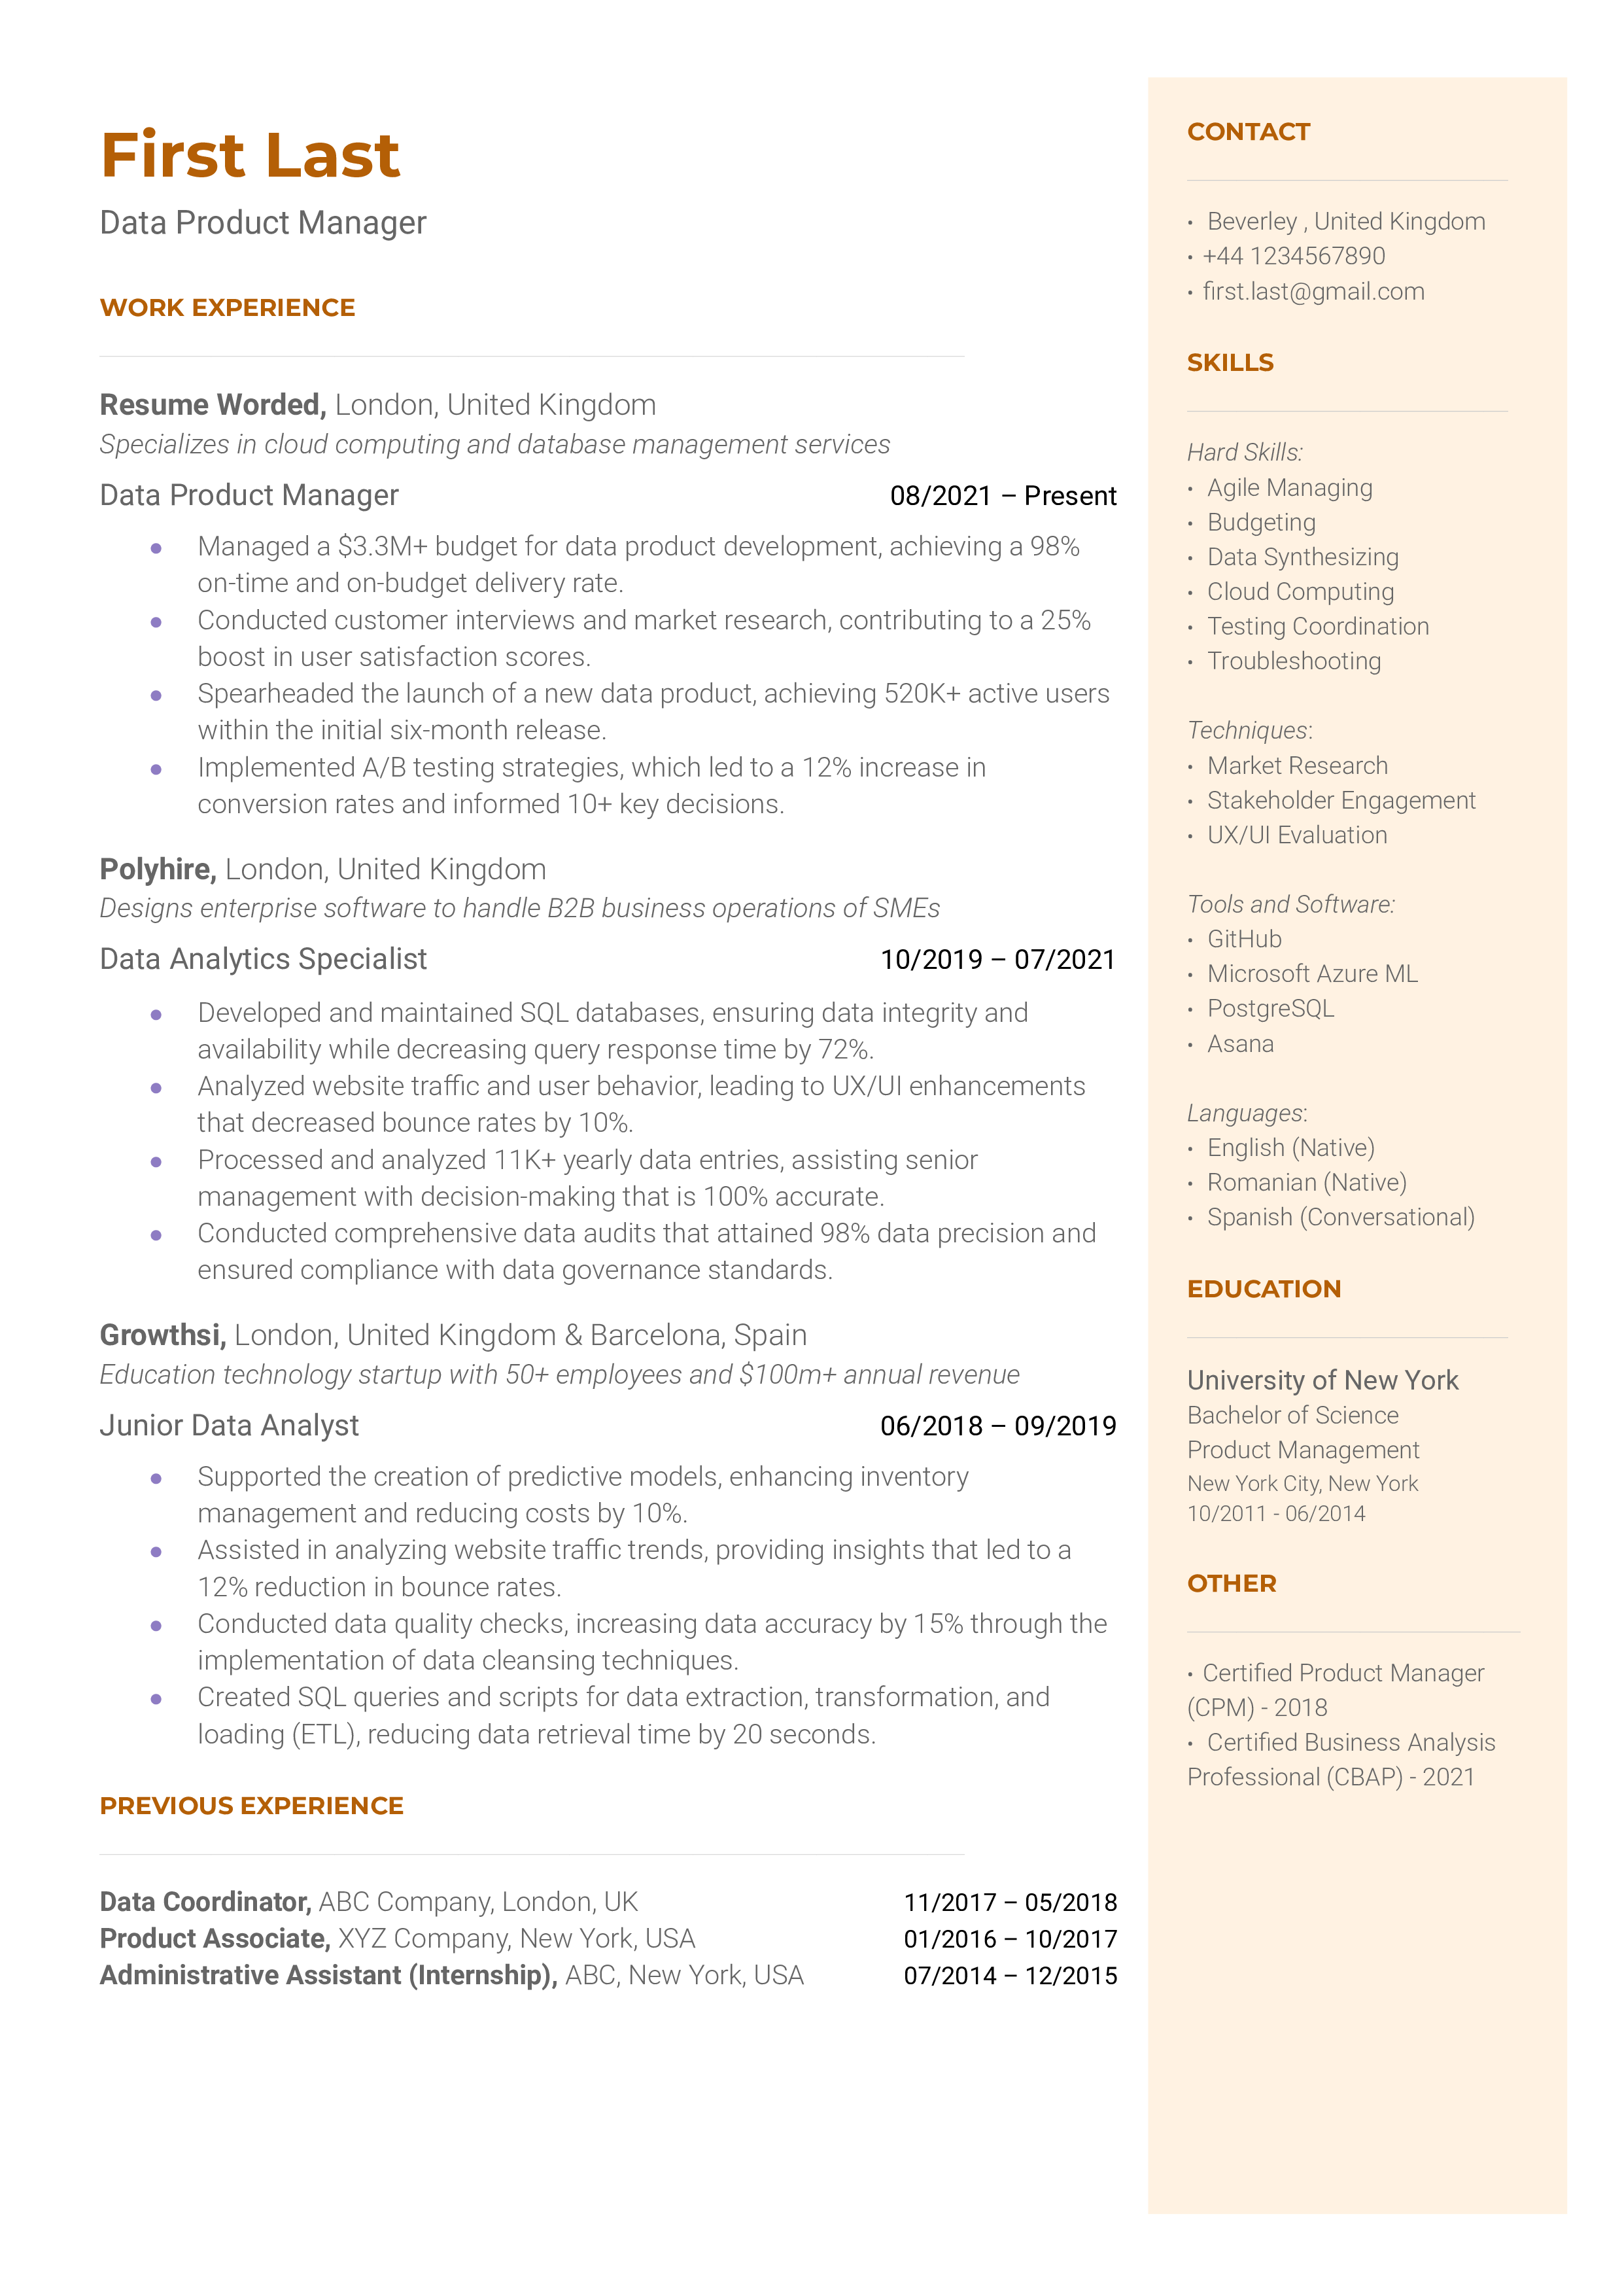 A well-structured resume for a Data Product Manager role.